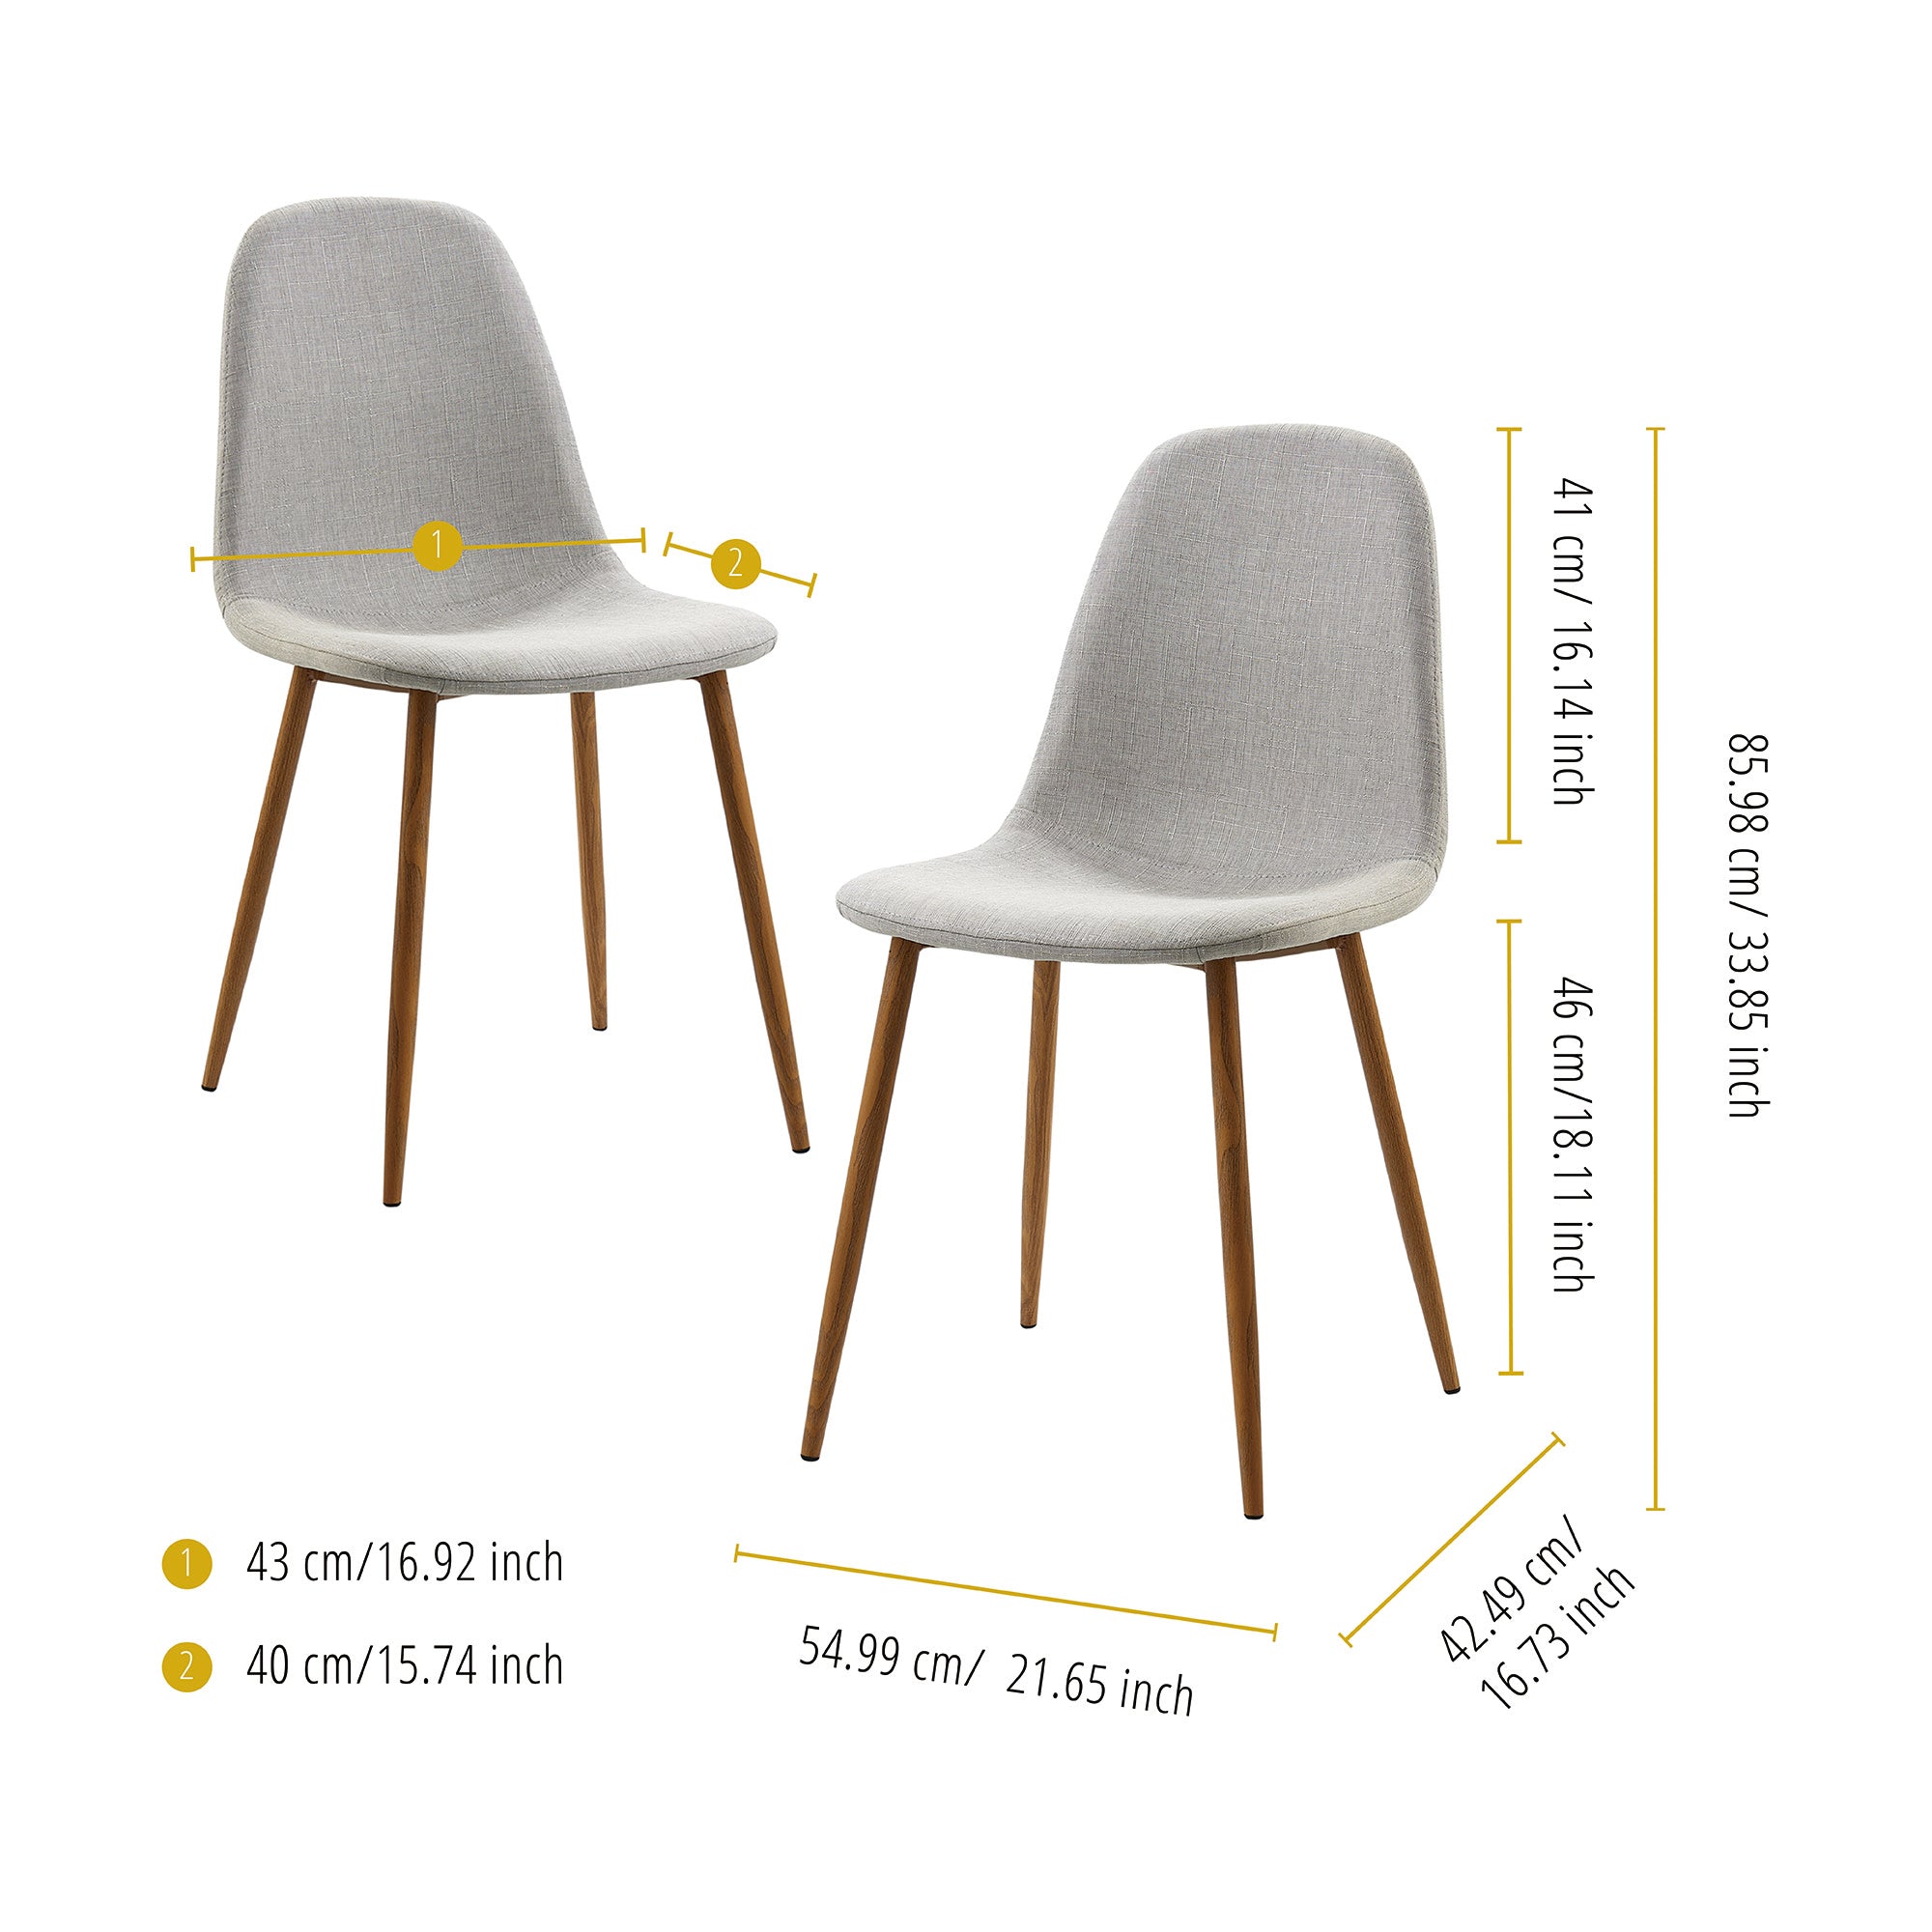 Teamson Home Minimalista Fabric Dining Chair with Wood Grain Metal Legs, Set of 2, Light Gray/Natural